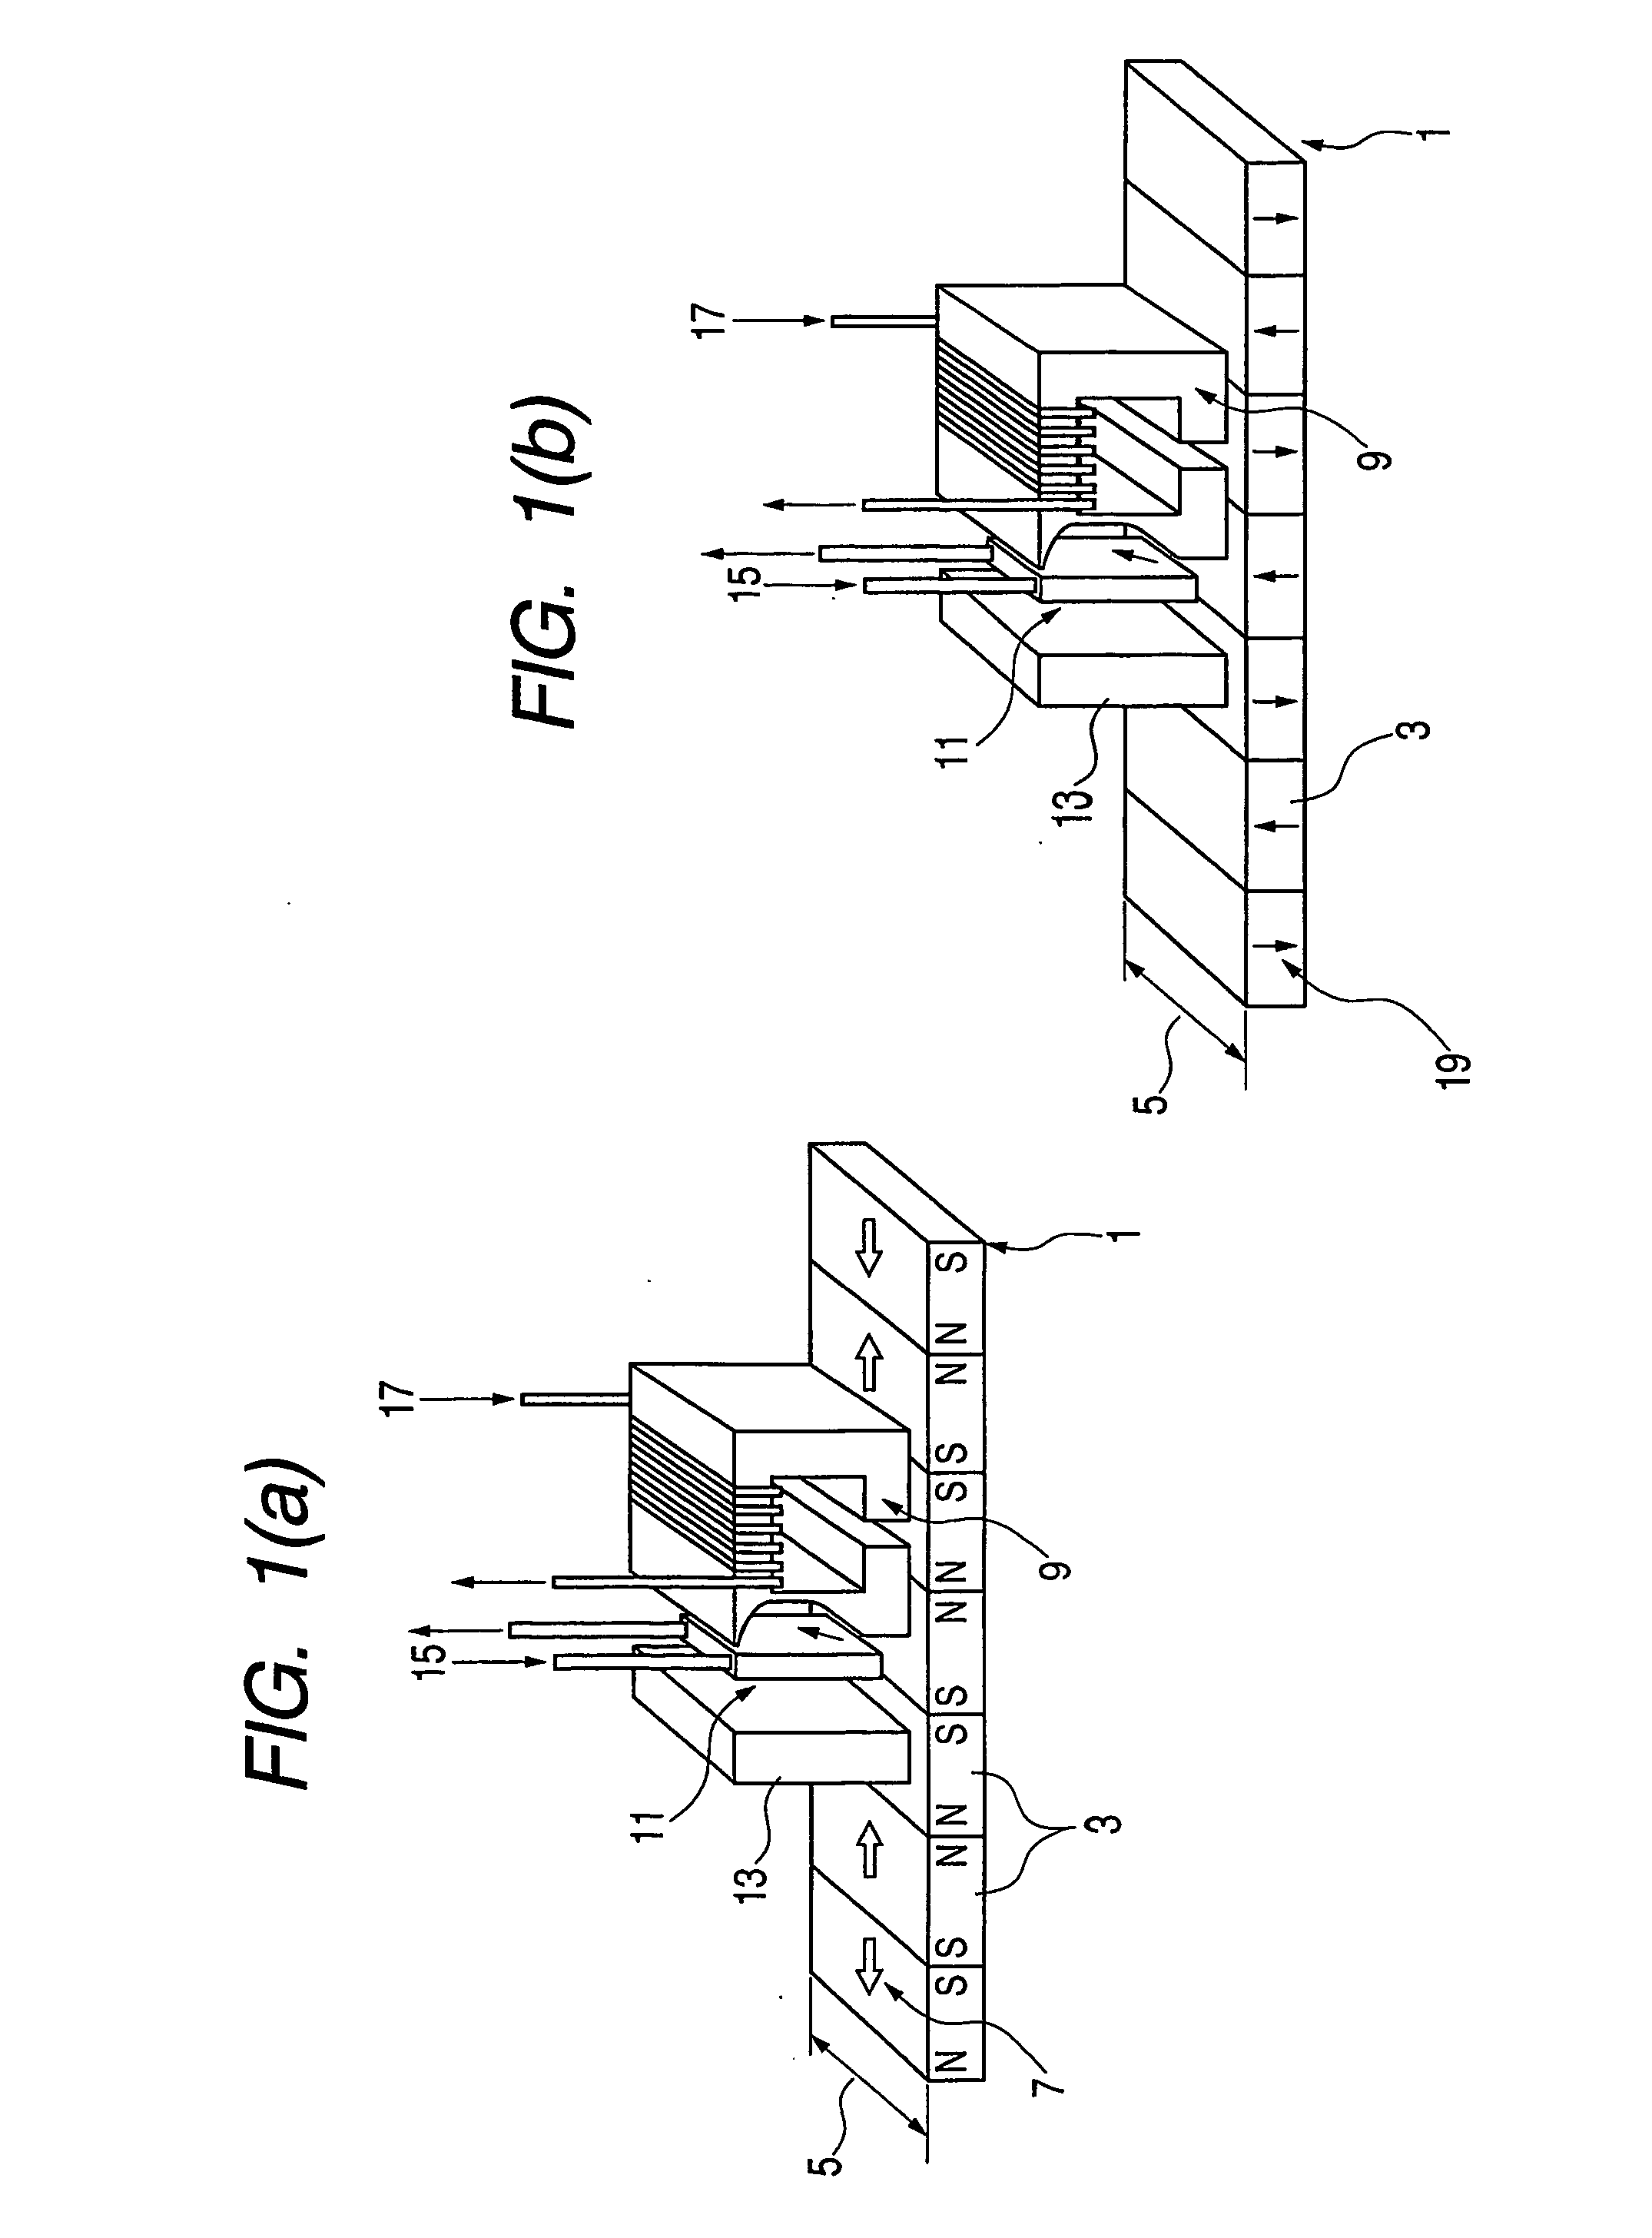 Composed free layer for stabilizing magnetoresistive head having low magnetostriction